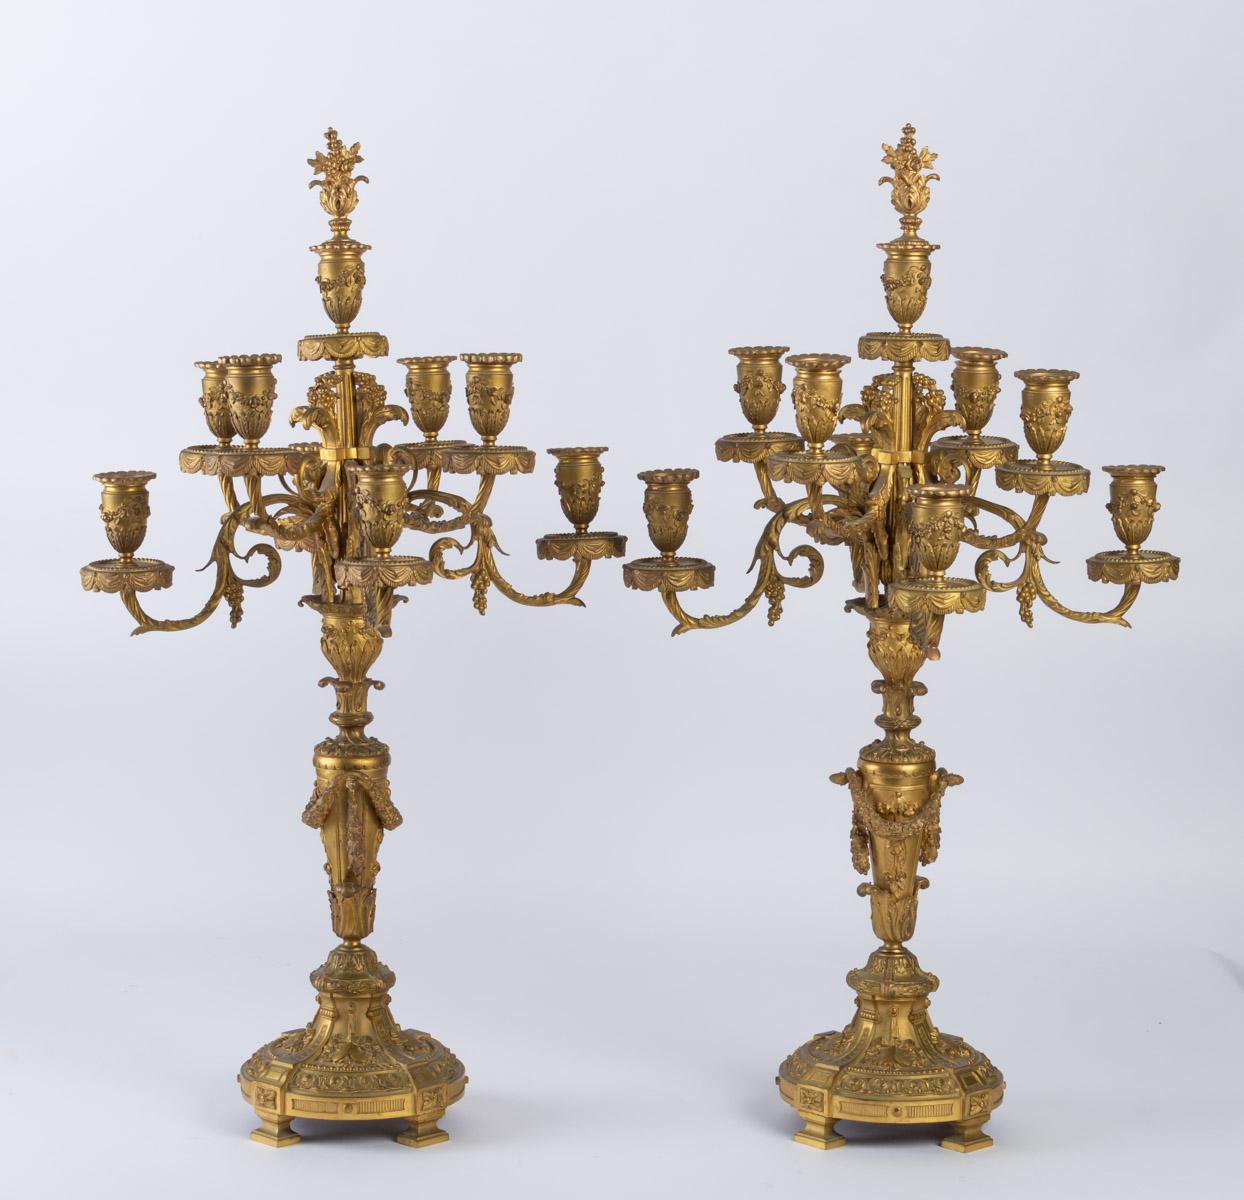 An important pair of gilt bronze candelabra, very beautifully chiselled, nine candles, original gilding, 19th century, Napoleon III period.

H: 69 cm, W: 40 cm, D: 40 cm